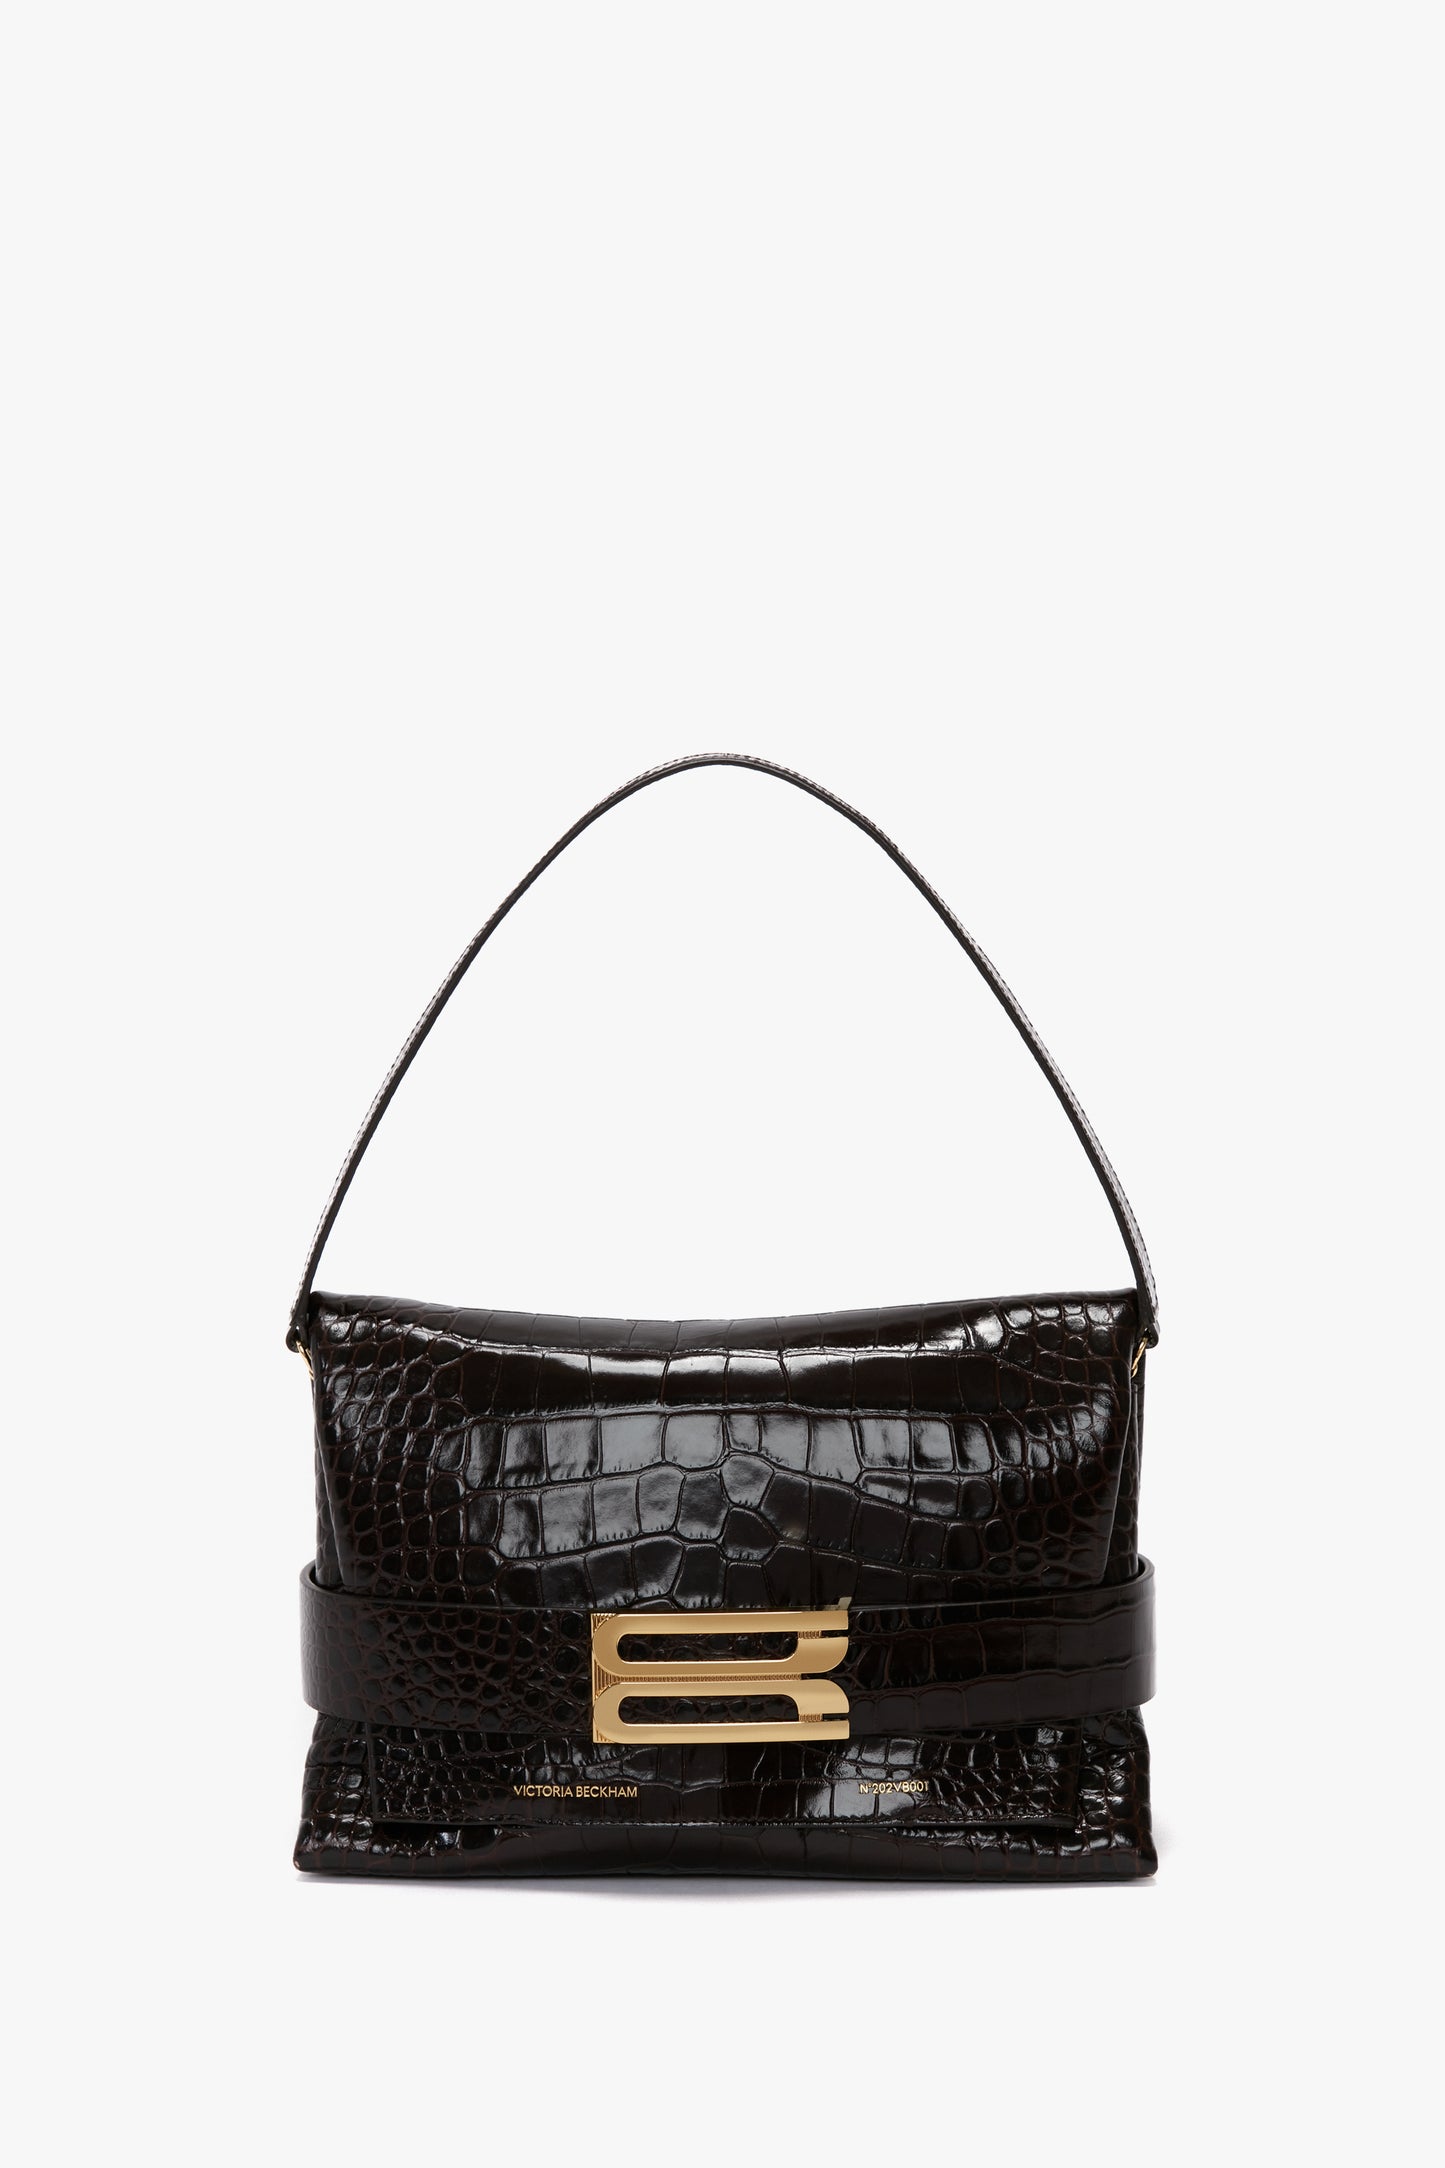 A black, calf leather B Pouch Bag In Croc Effect Espresso Leather by Victoria Beckham featuring an embossed crocodile print and a single strap with a gold buckle clasp is displayed against a plain white background.